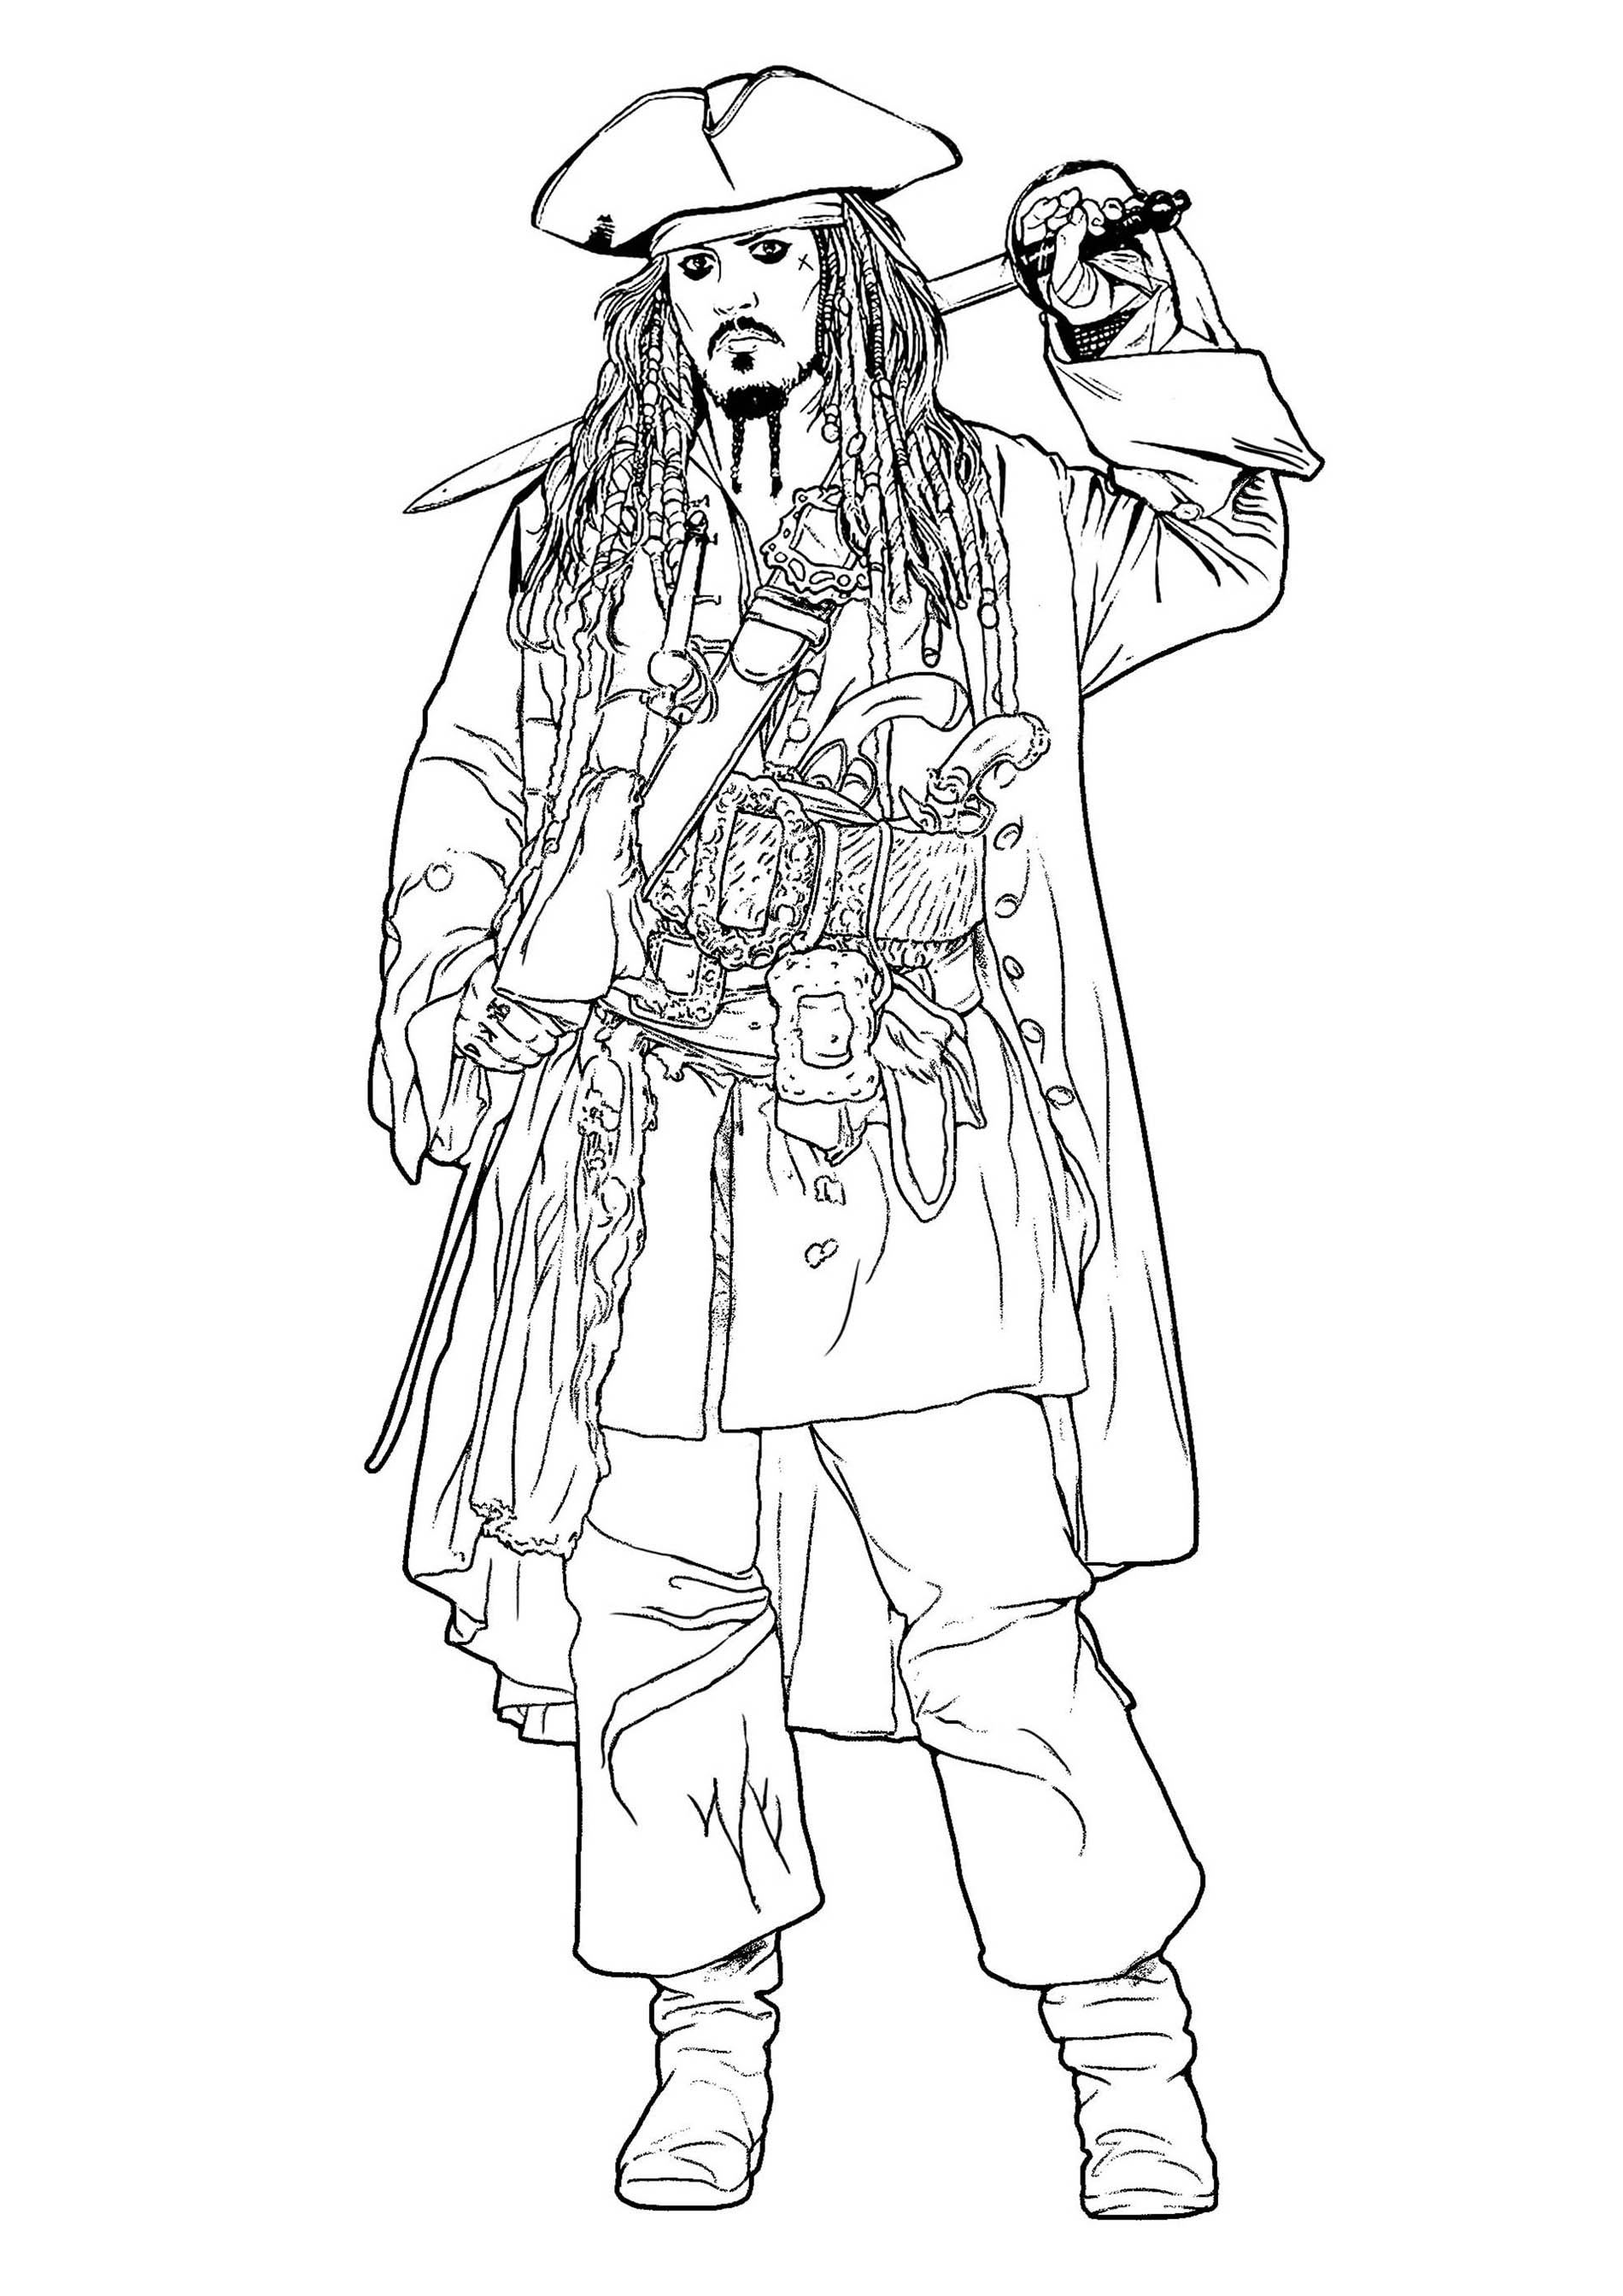 Jack Sparrow (Pirates of the Caribbean) - Pirates of the Caribbean Kids